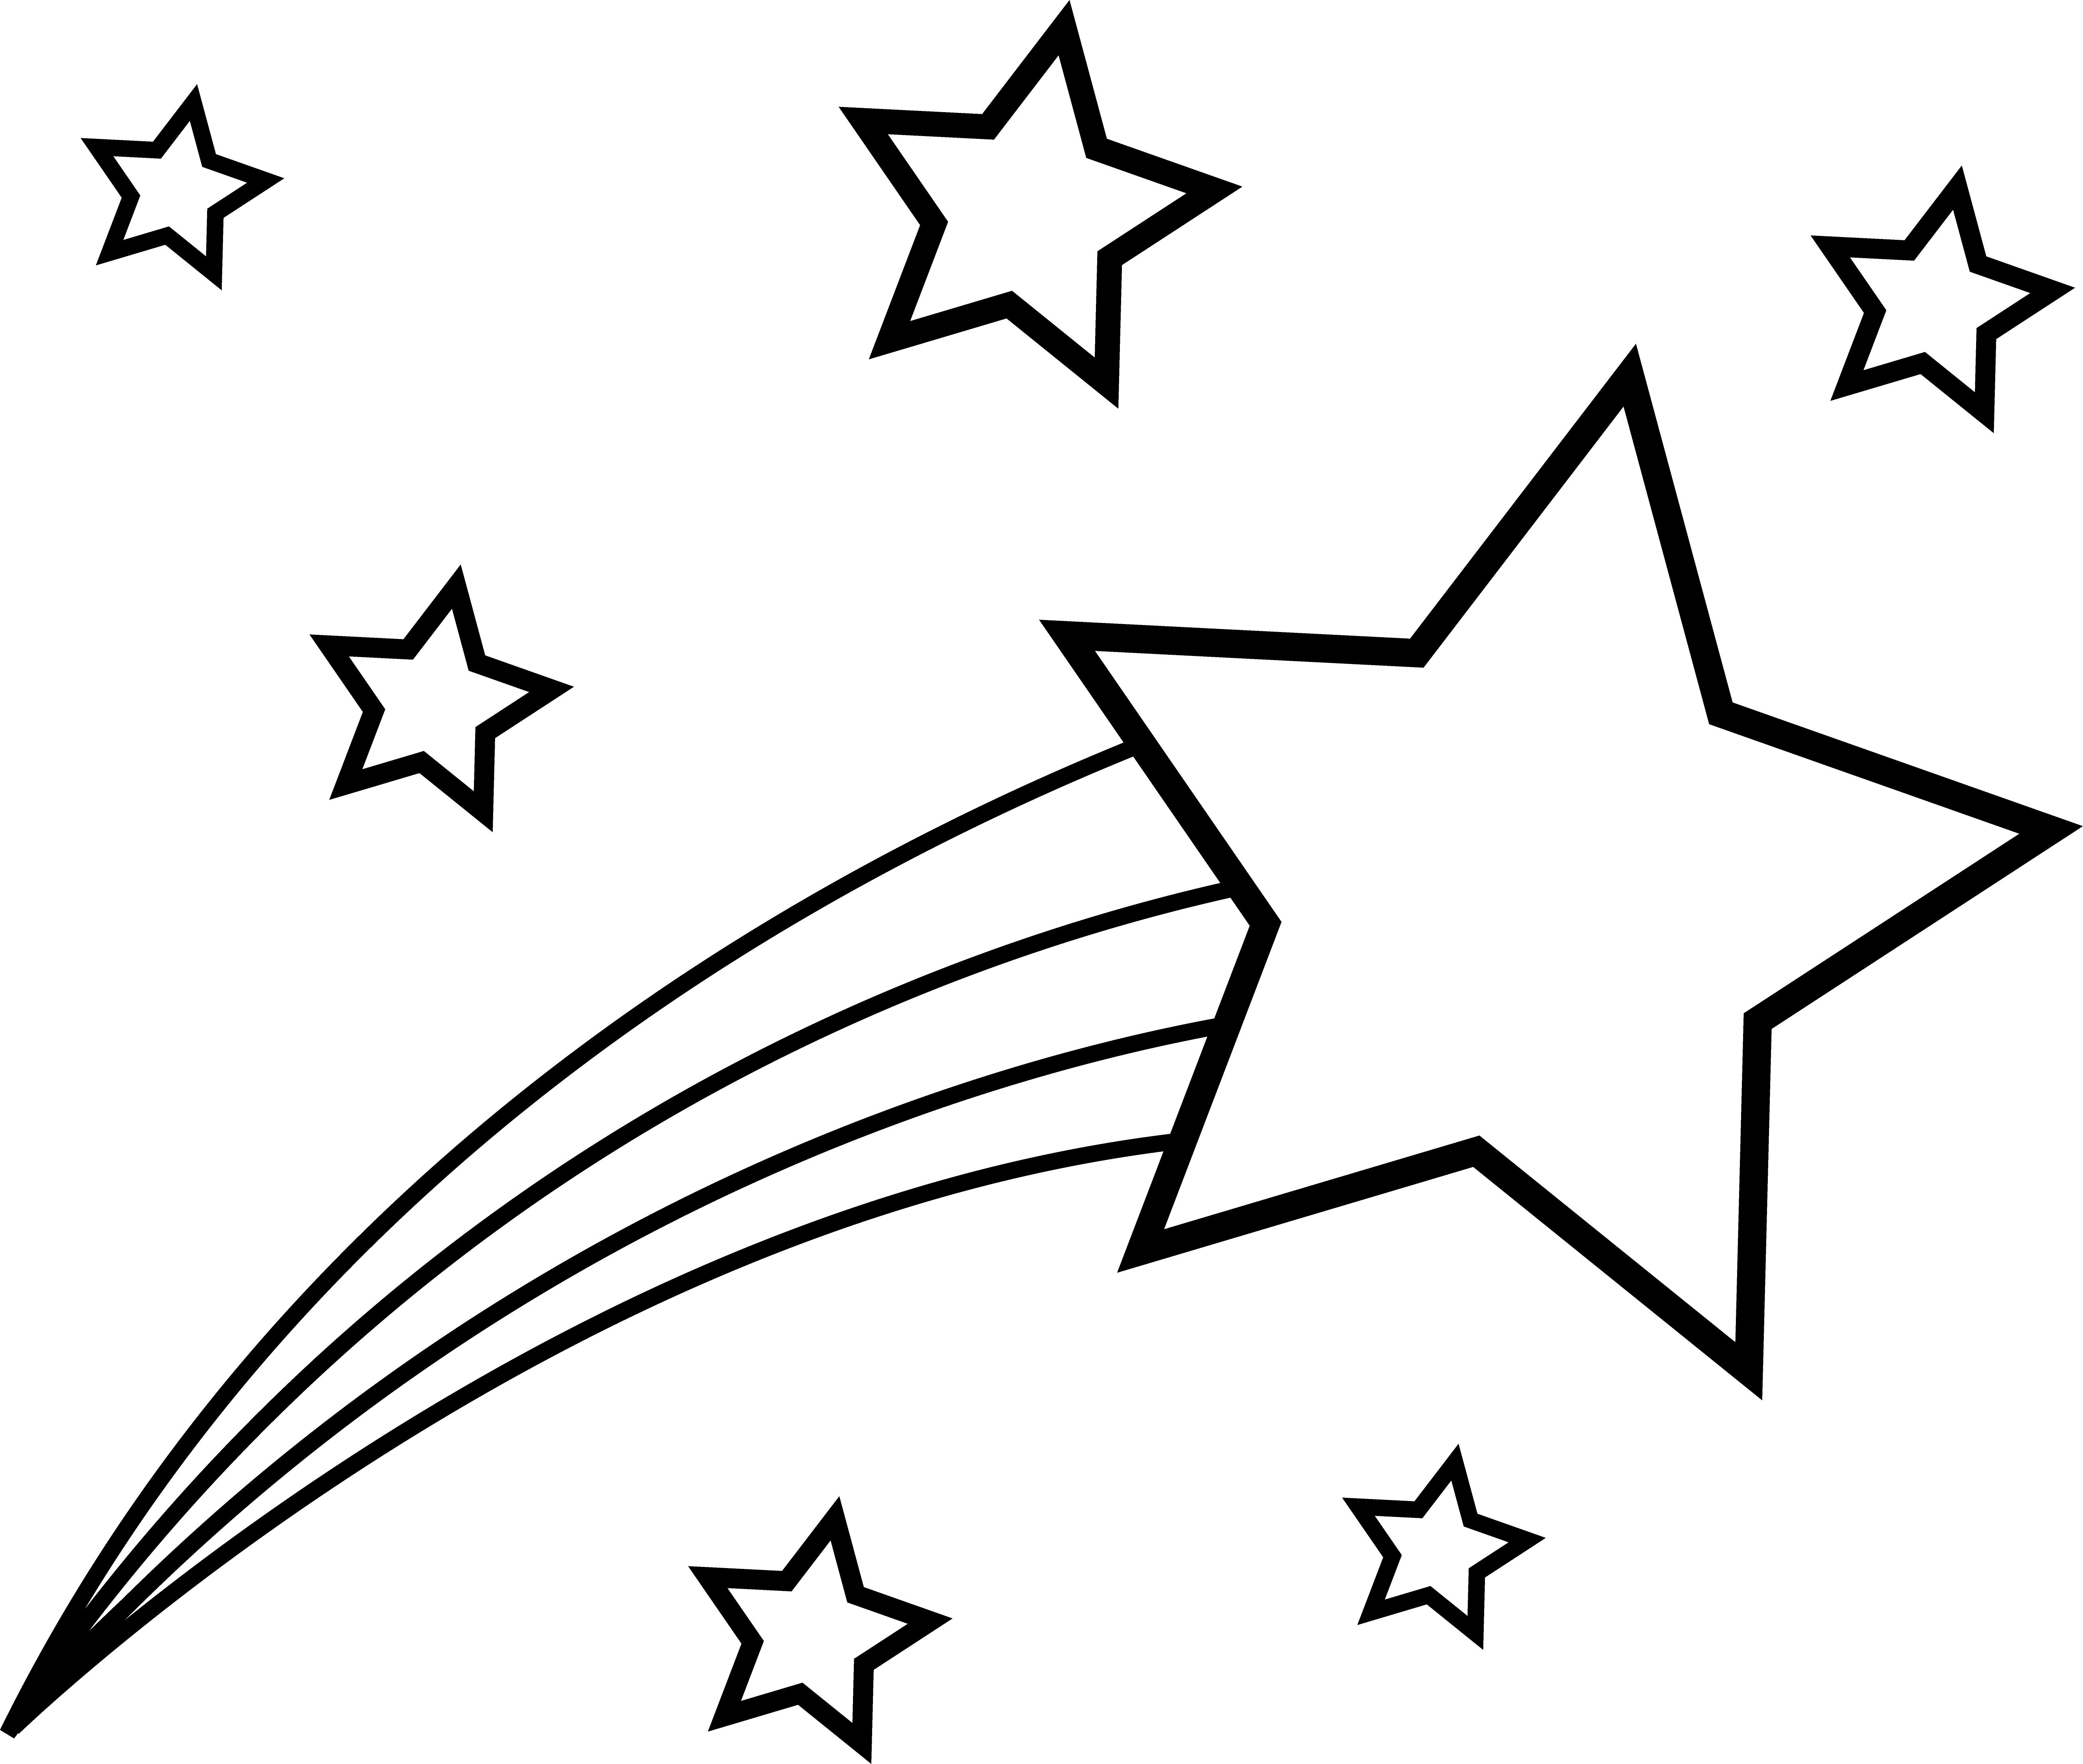 Shooting Star Line Drawing - ClipArt Best